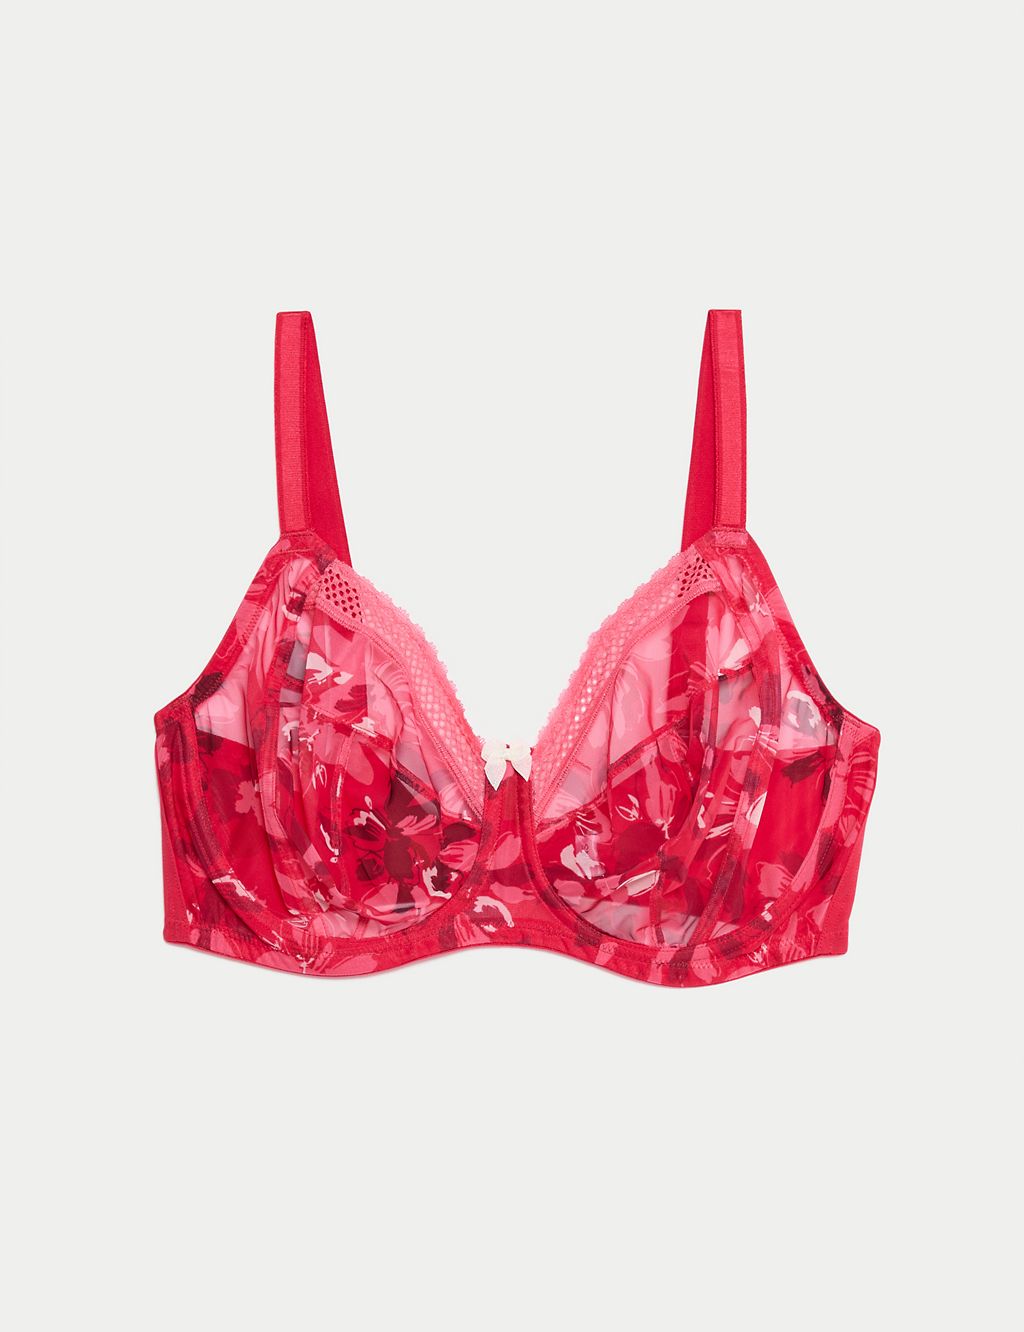 Printed Mesh Wired Extra Support Bra F-J 1 of 6